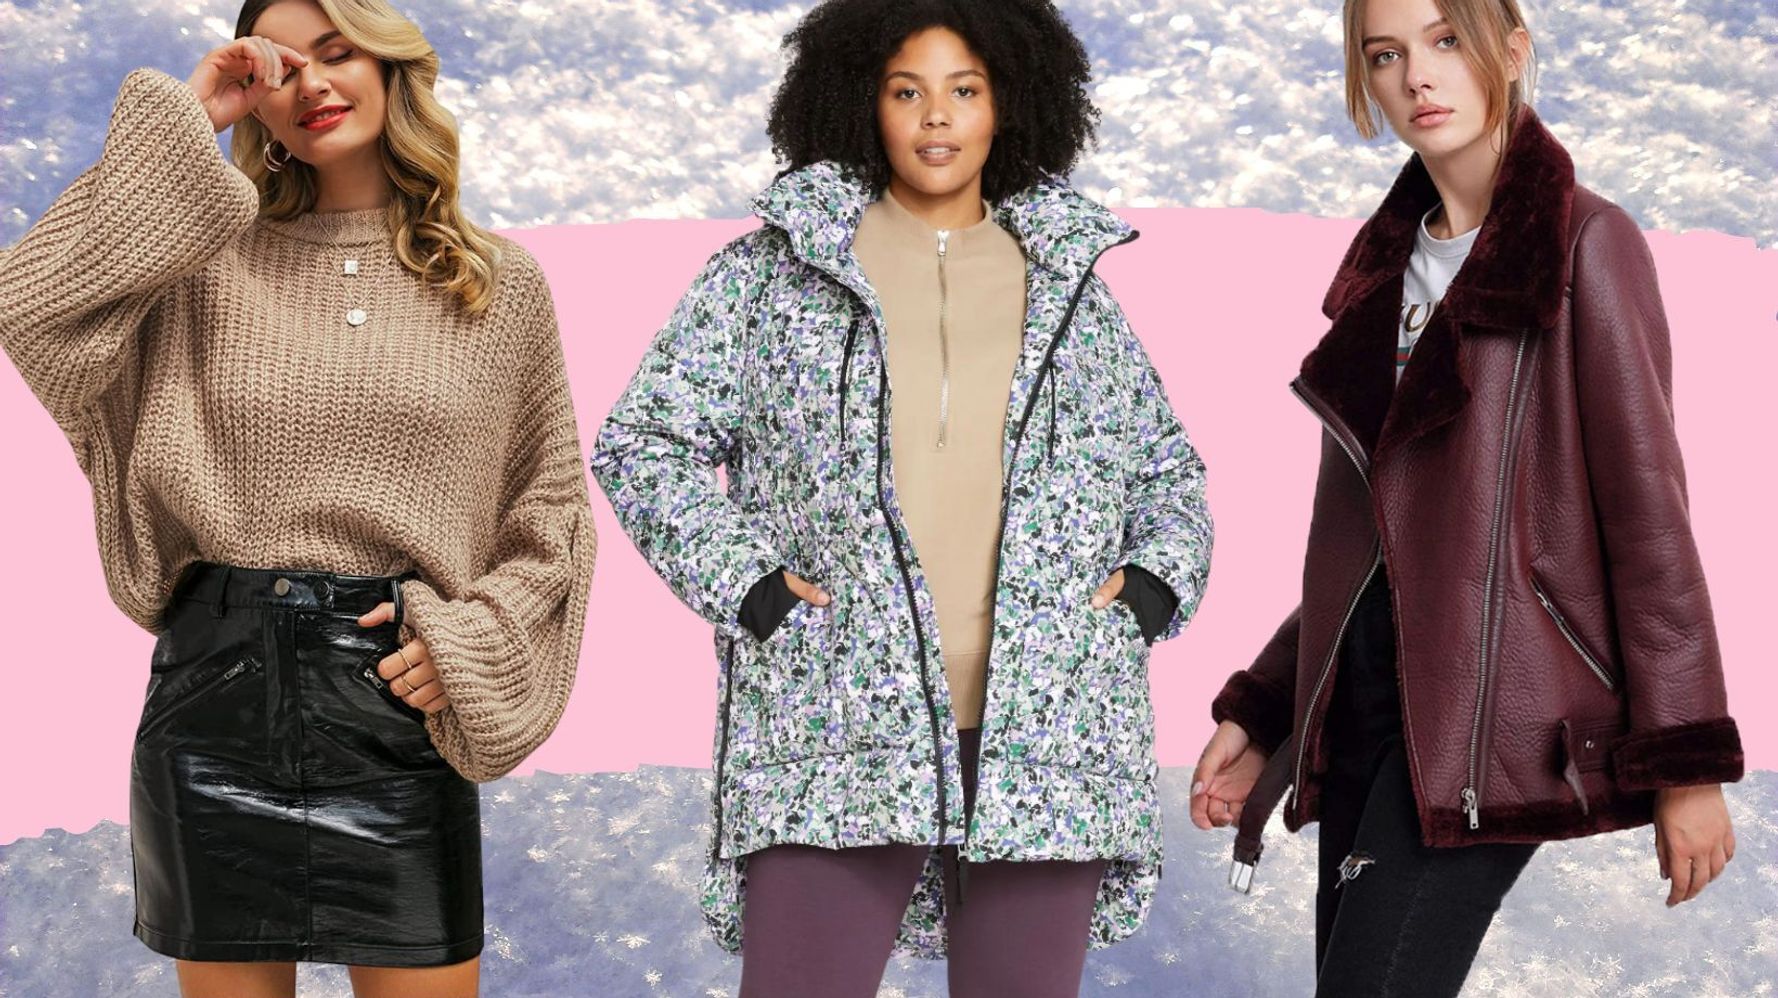 38 Clothing Items For Winter That Are Cute And Warm